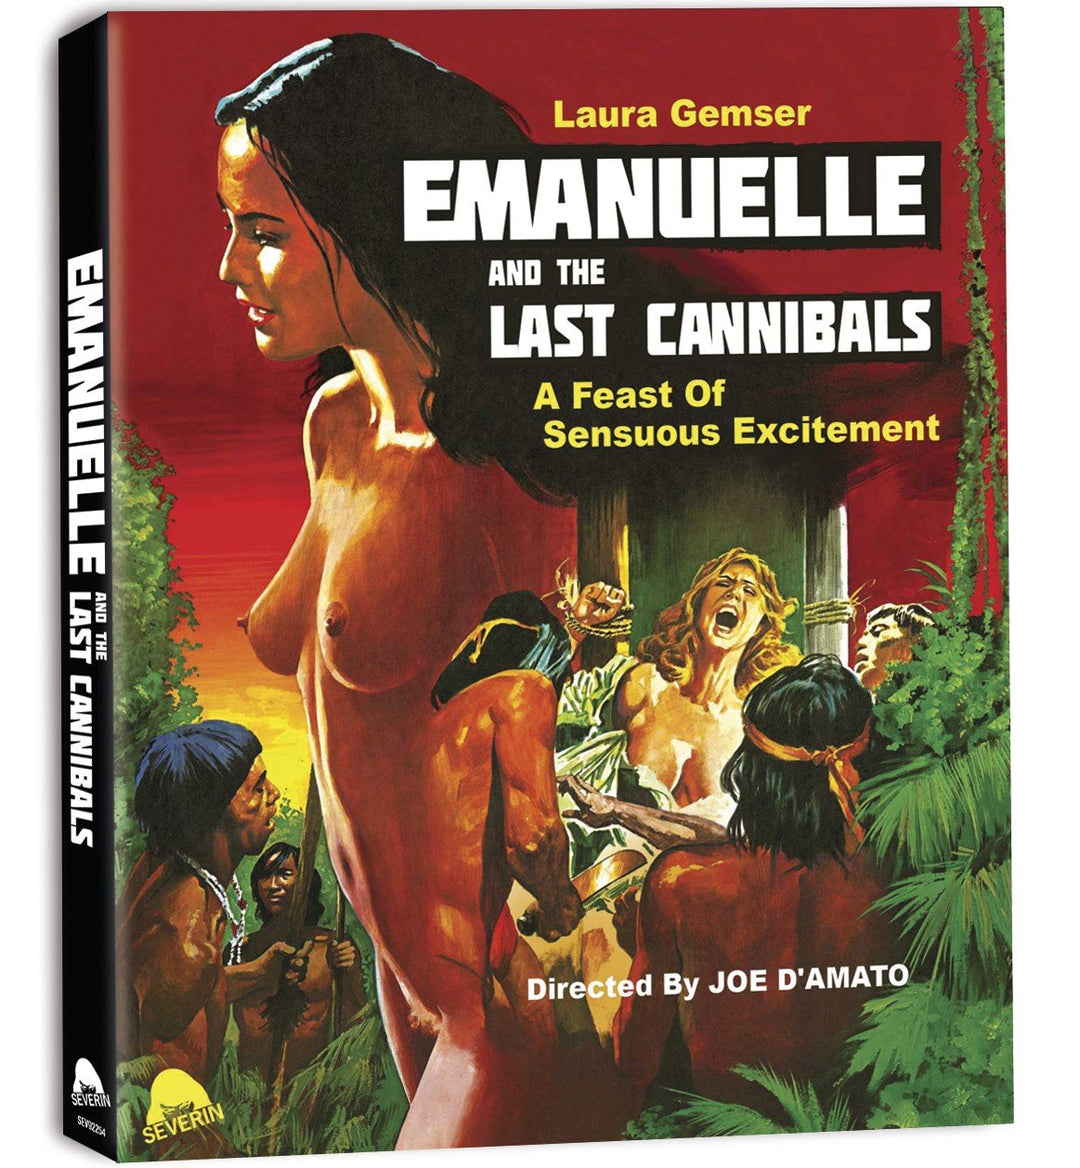 Emanuelle and the Last Cannibals [Blu-ray w/Slipcover]